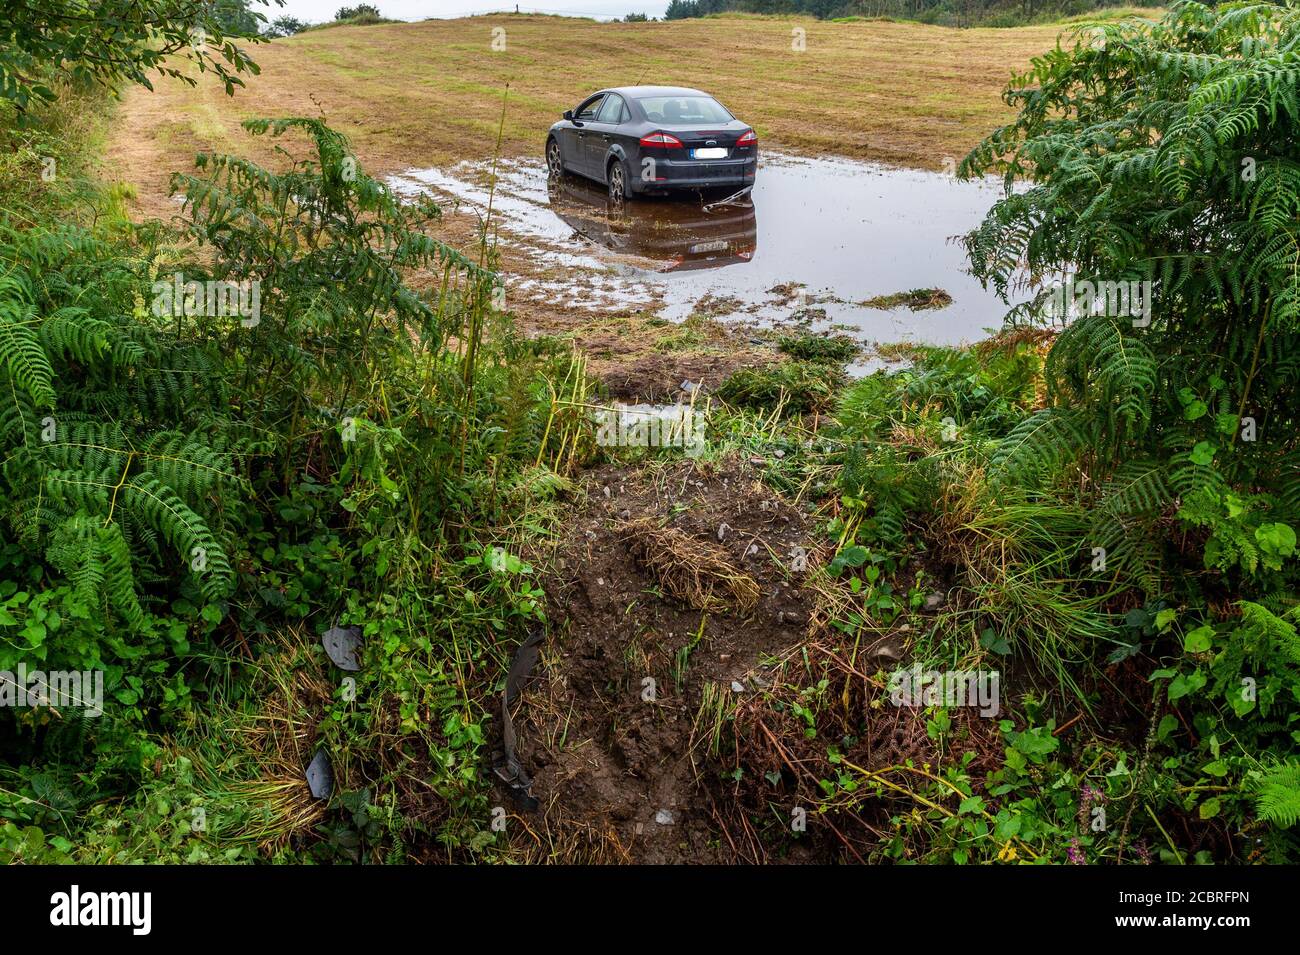 Bantry, West Cork, Ireland. 15th Aug, 2020. A car crashed into a field near Bantry overnight, jumping a 10ft ditch in the process. The car veered off the road, over a ditch, through a fence and came to rest in a pool of water inside the field. The driver wasn't to be seen when this picture was taken. Credit: AG News/Alamy Live News Stock Photo